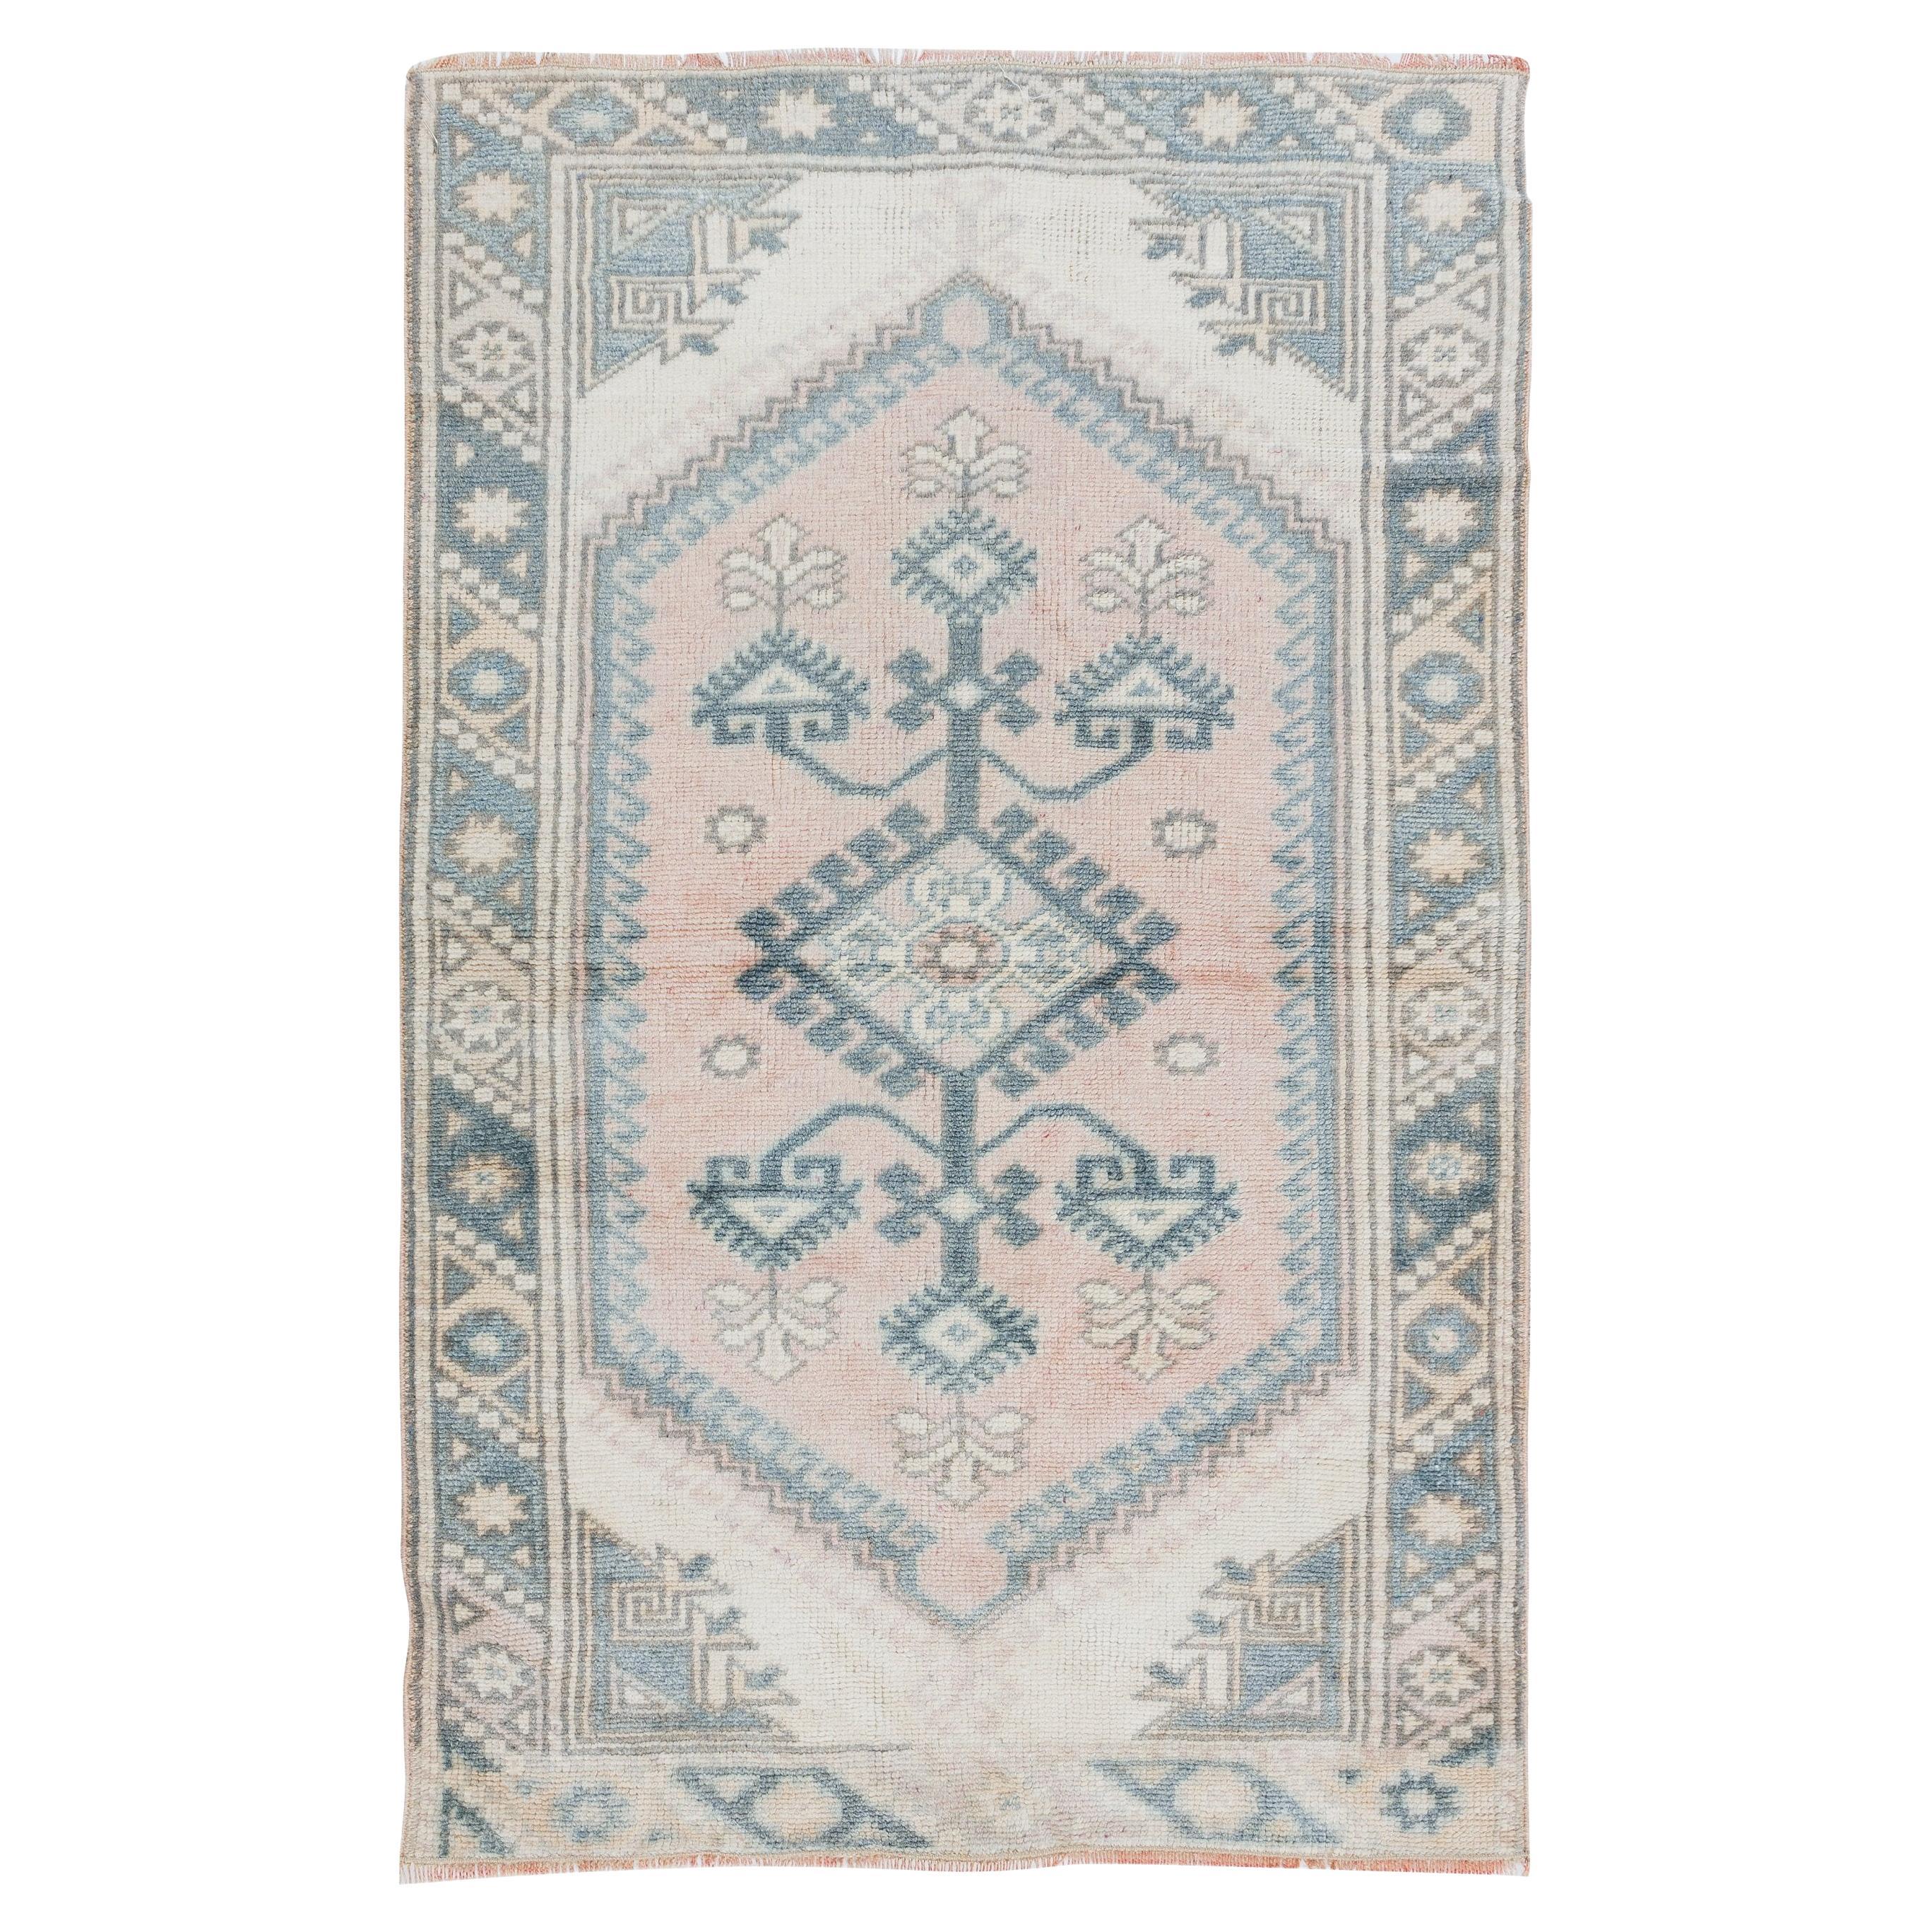 2.3x3.8 Ft Vintage Handmade Geometric Turkish Accent Rug in Soft Colors For Sale